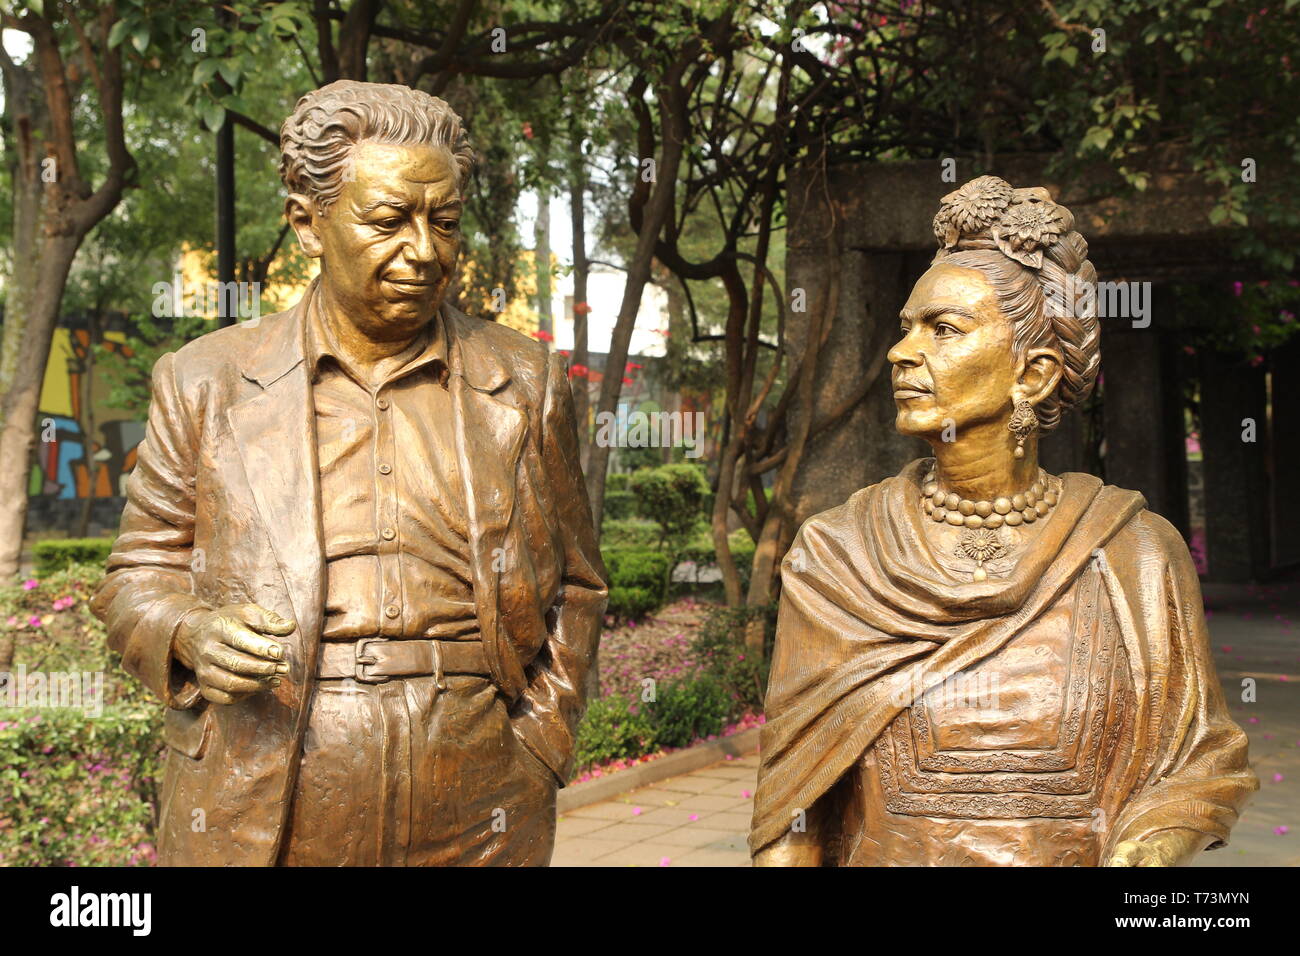 Frida Kahlo and Diego Rivera statues in Coyoacan borough, Mexico city Stock  Photo - Alamy